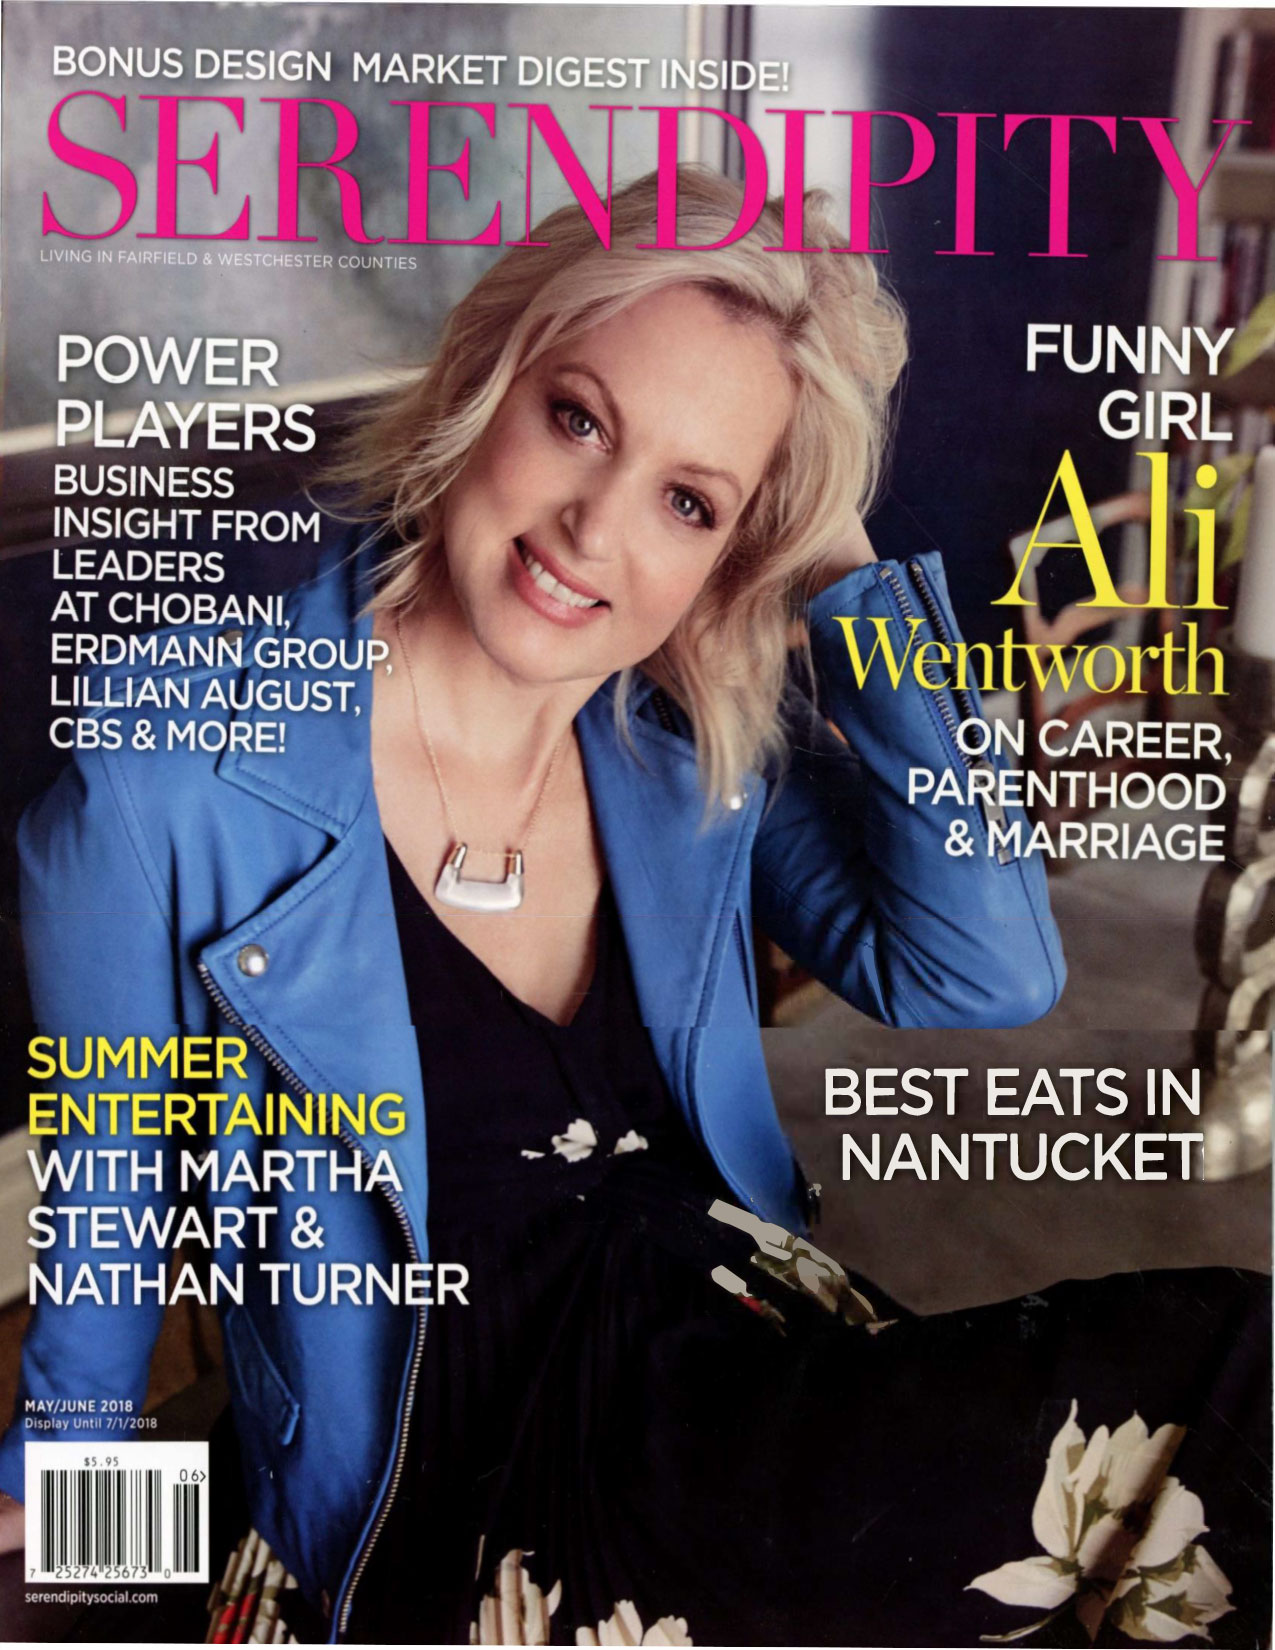 Serendipity Magazine: May 2018 Charlotte Moss Entertains Cover